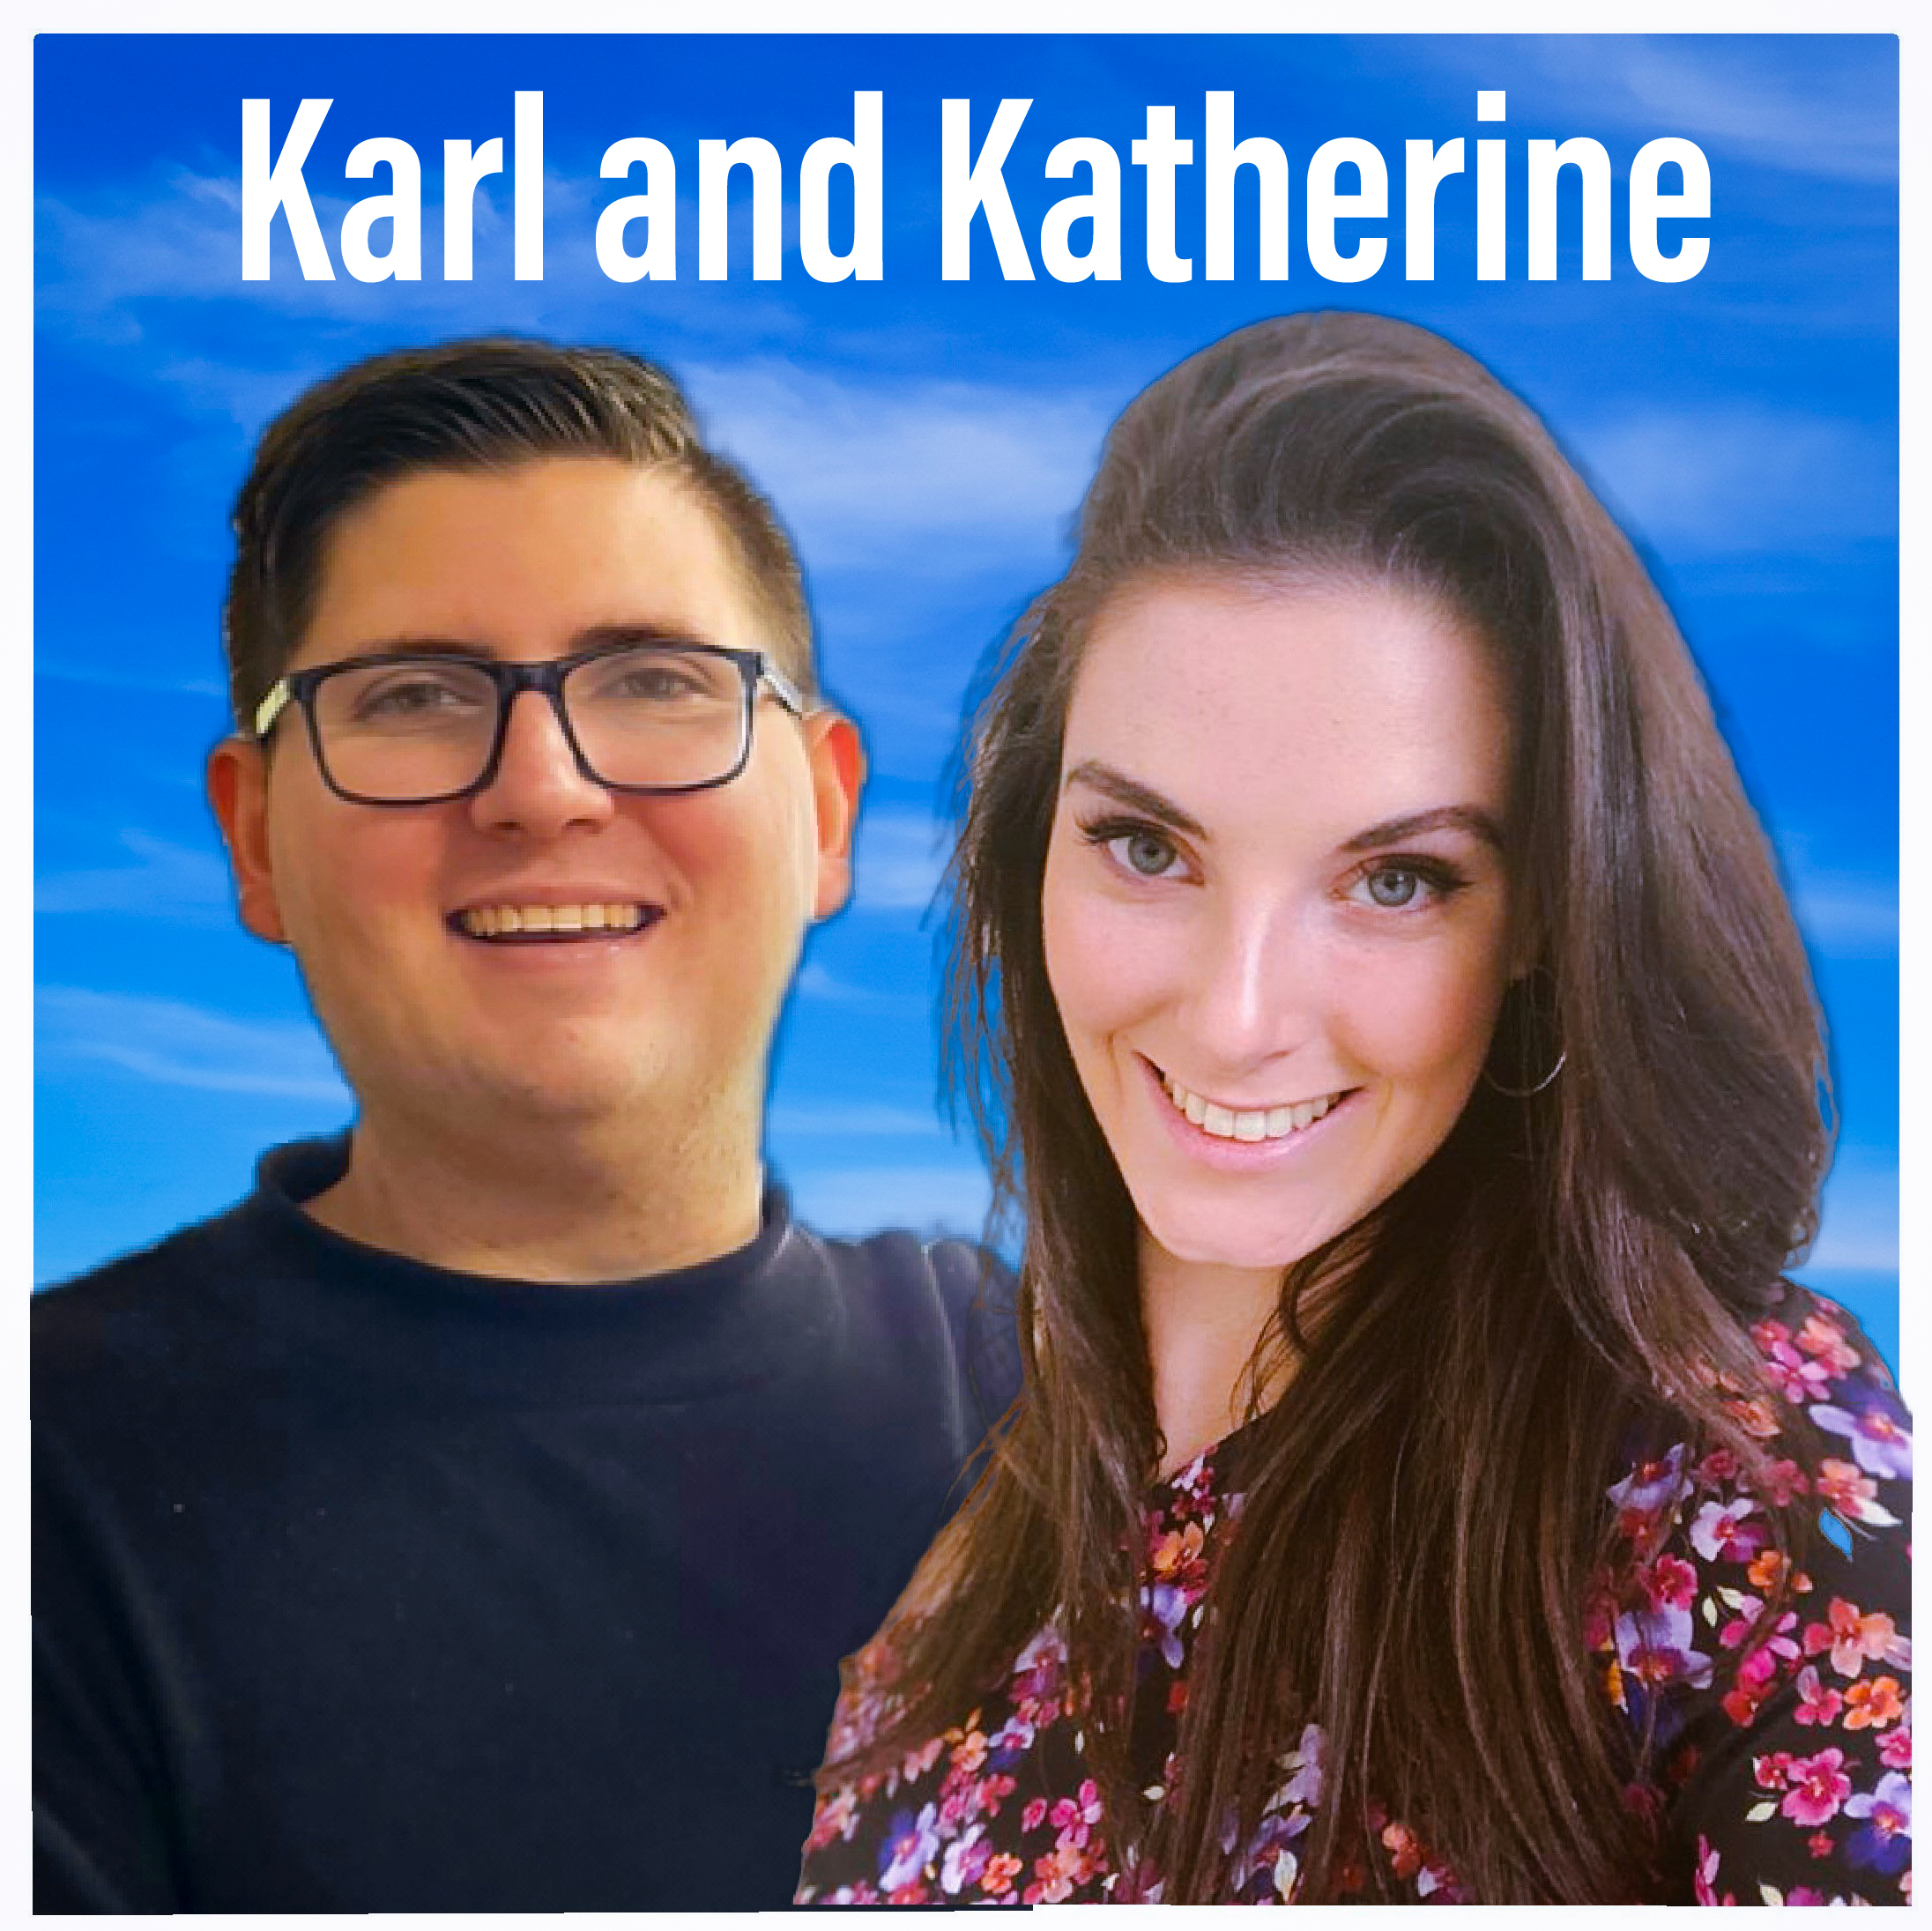 Karl and Katherine - Monday 29th March 2021